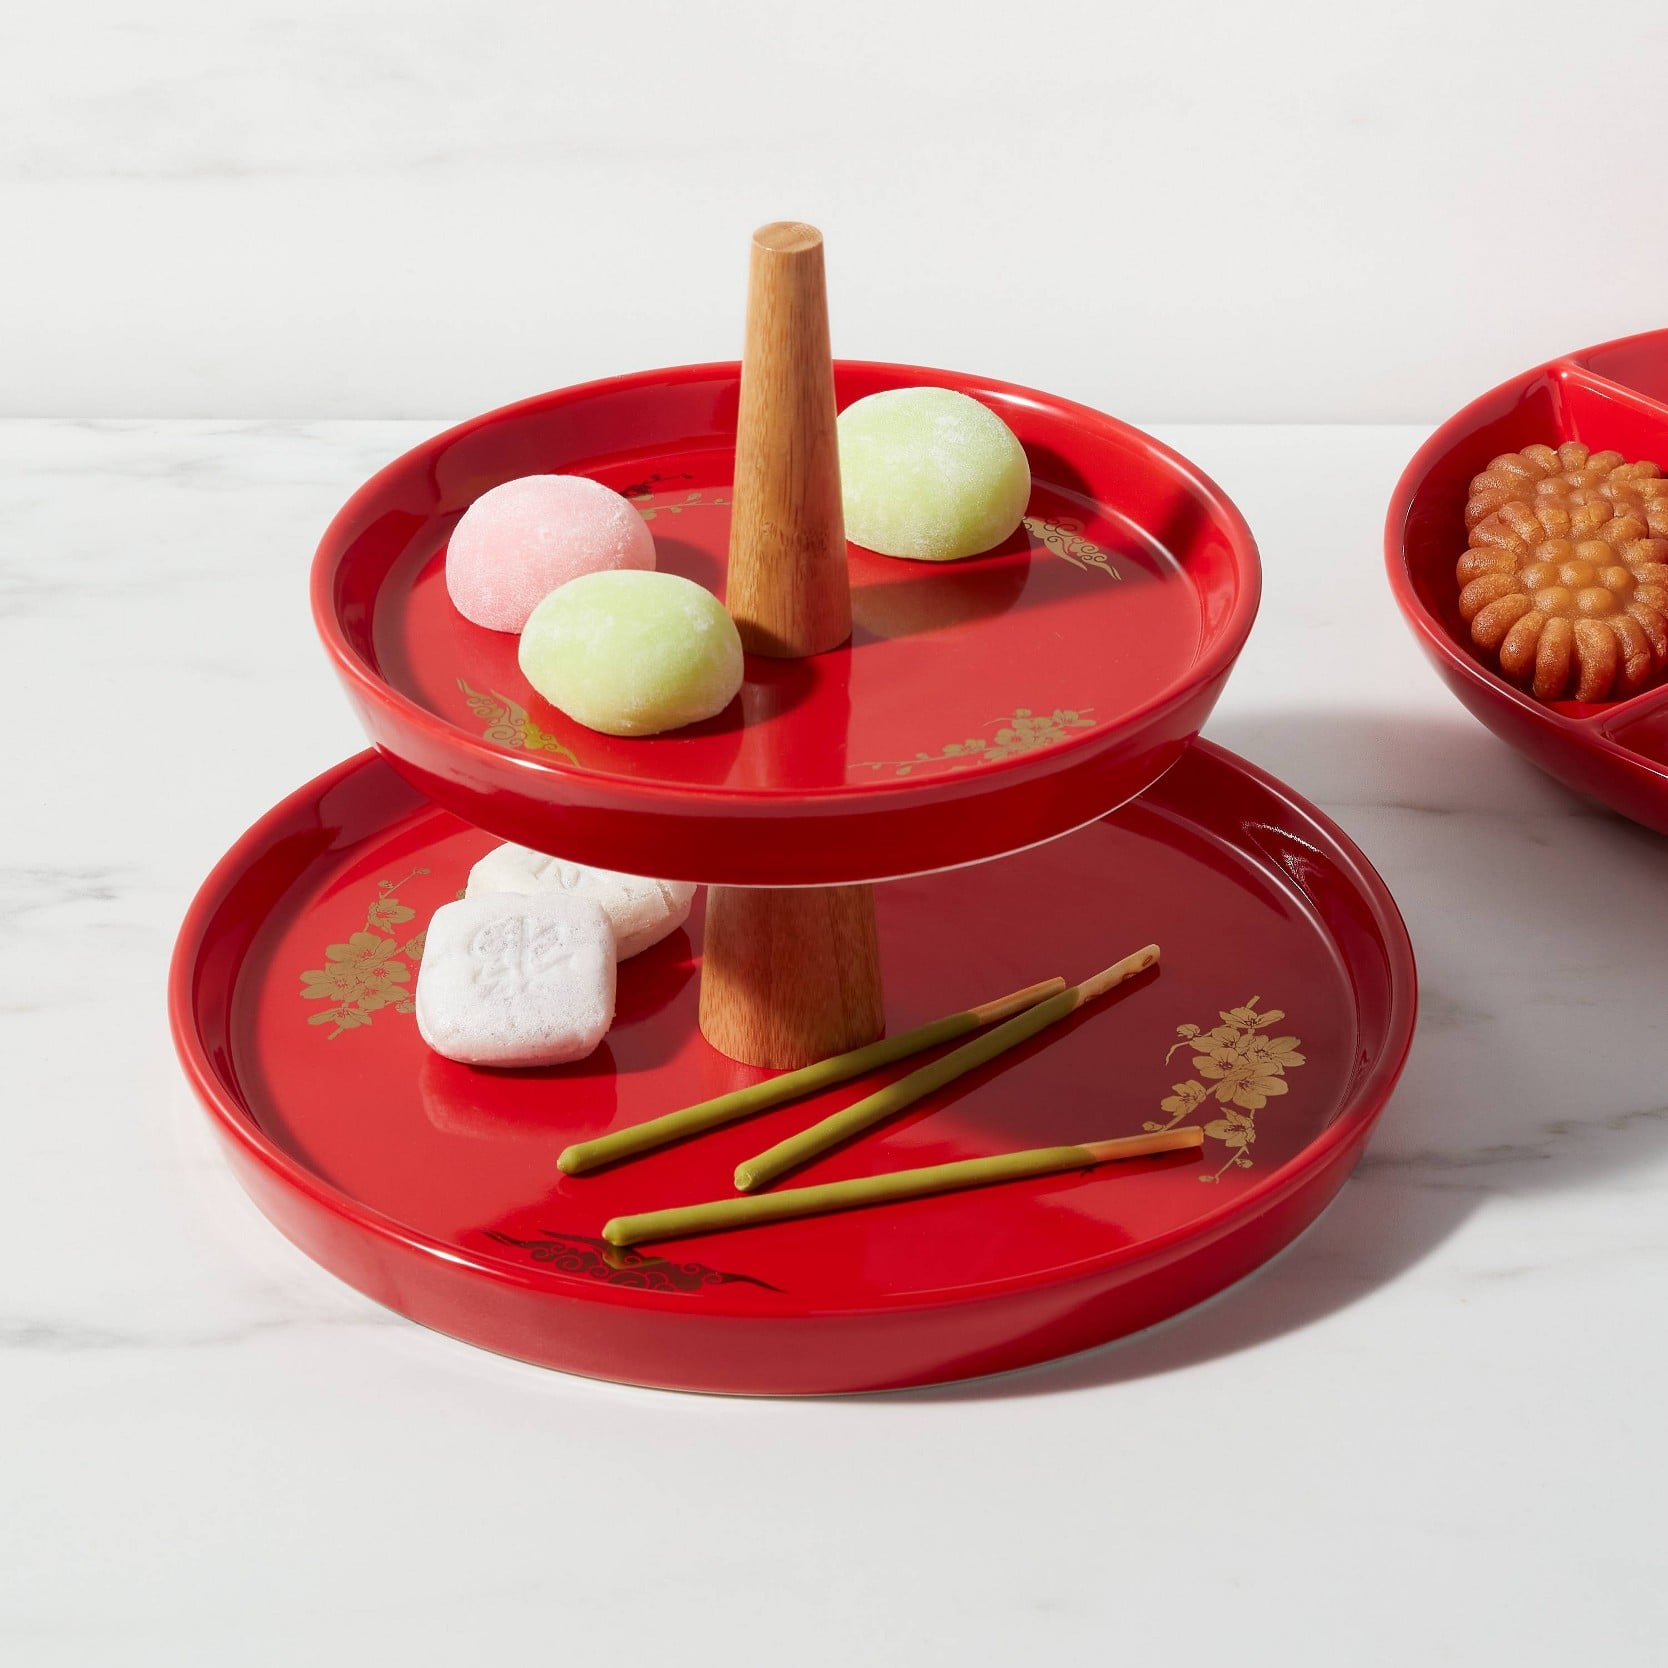 Loewe Chinese Lunar New Year Chopsticks Set - Brown Decorative Accents,  Decor & Accessories - LOW50132